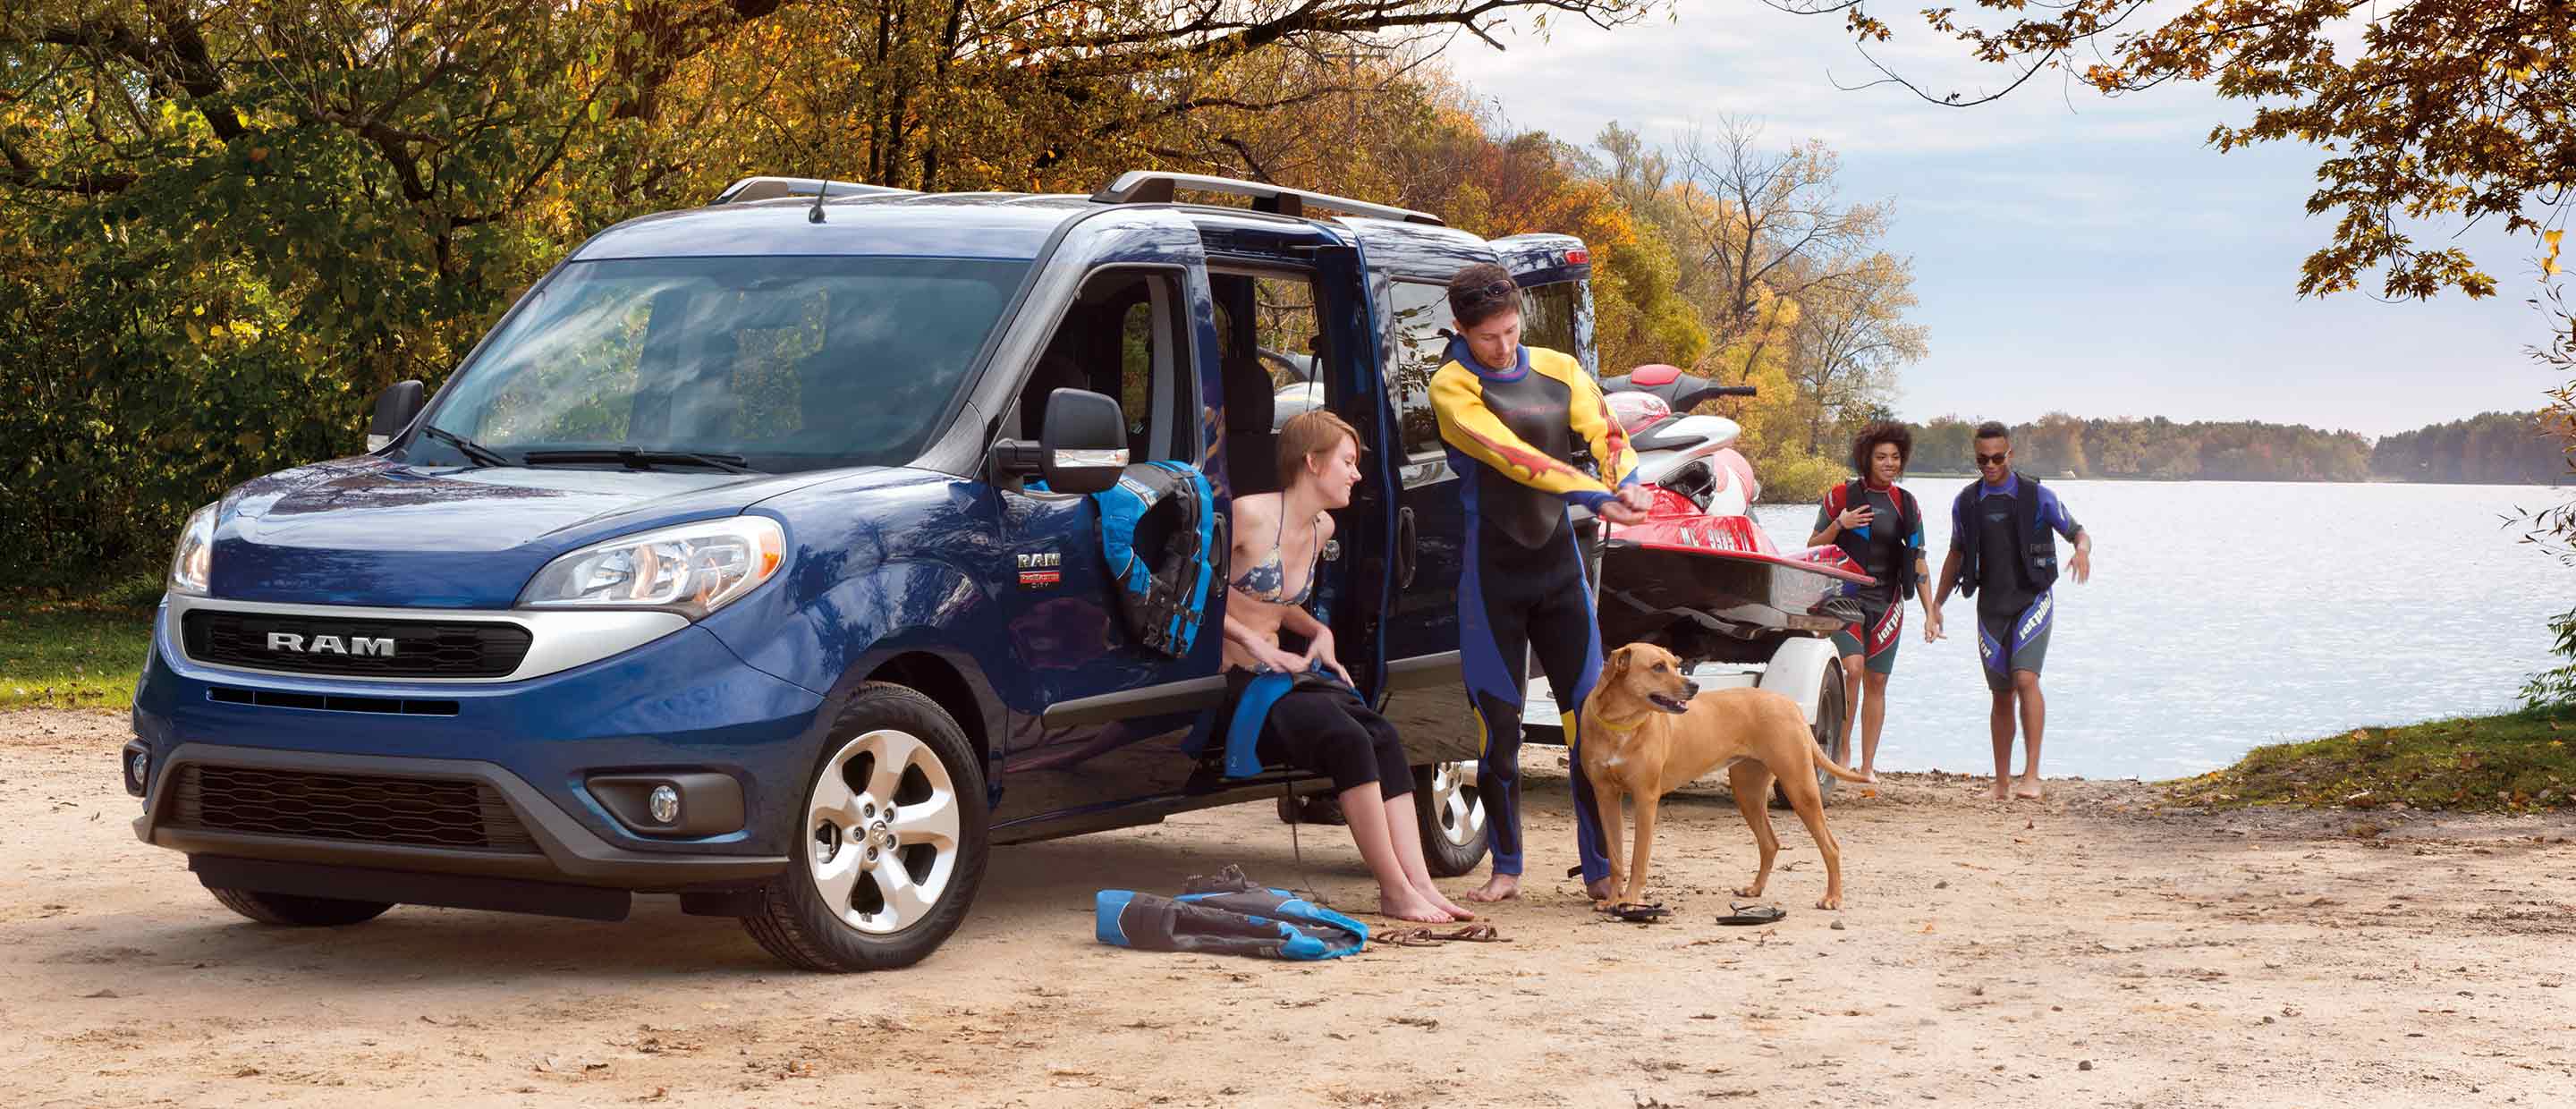 A 2022 Ram ProMaster City Wagon parked on a beach with a jet ski on a trailer behind it and a man and woman putting on wetsuits beside the vehicle.